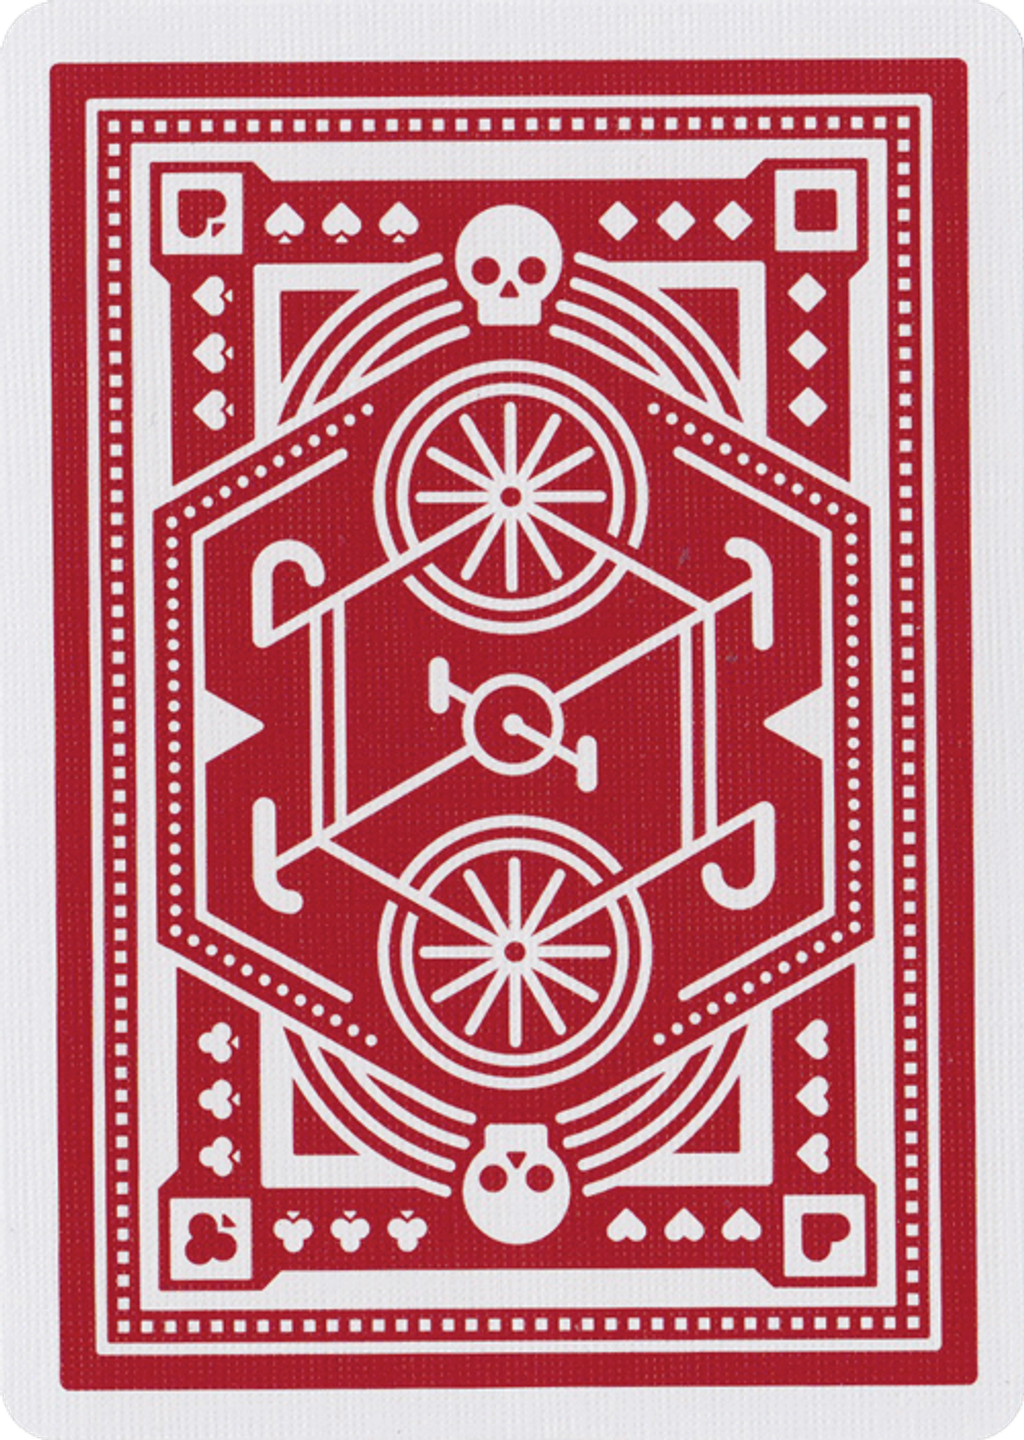 playing-cards-red-wheel-1_1024x1024.png